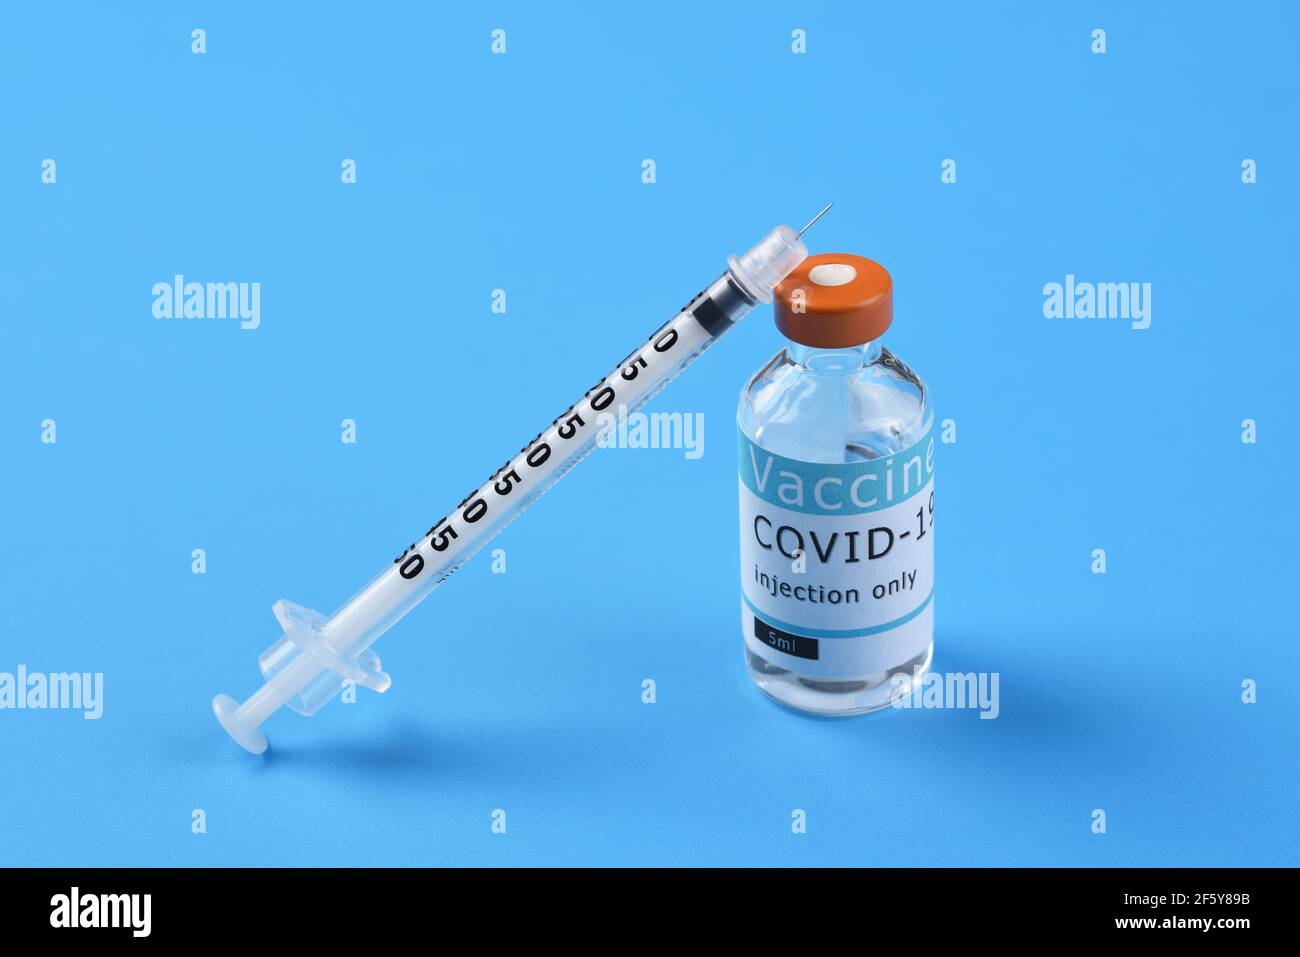 A vial of Covid-19 vaccine with a syringe leaning on the bottle on a blue background, with copy space. Stock Photo